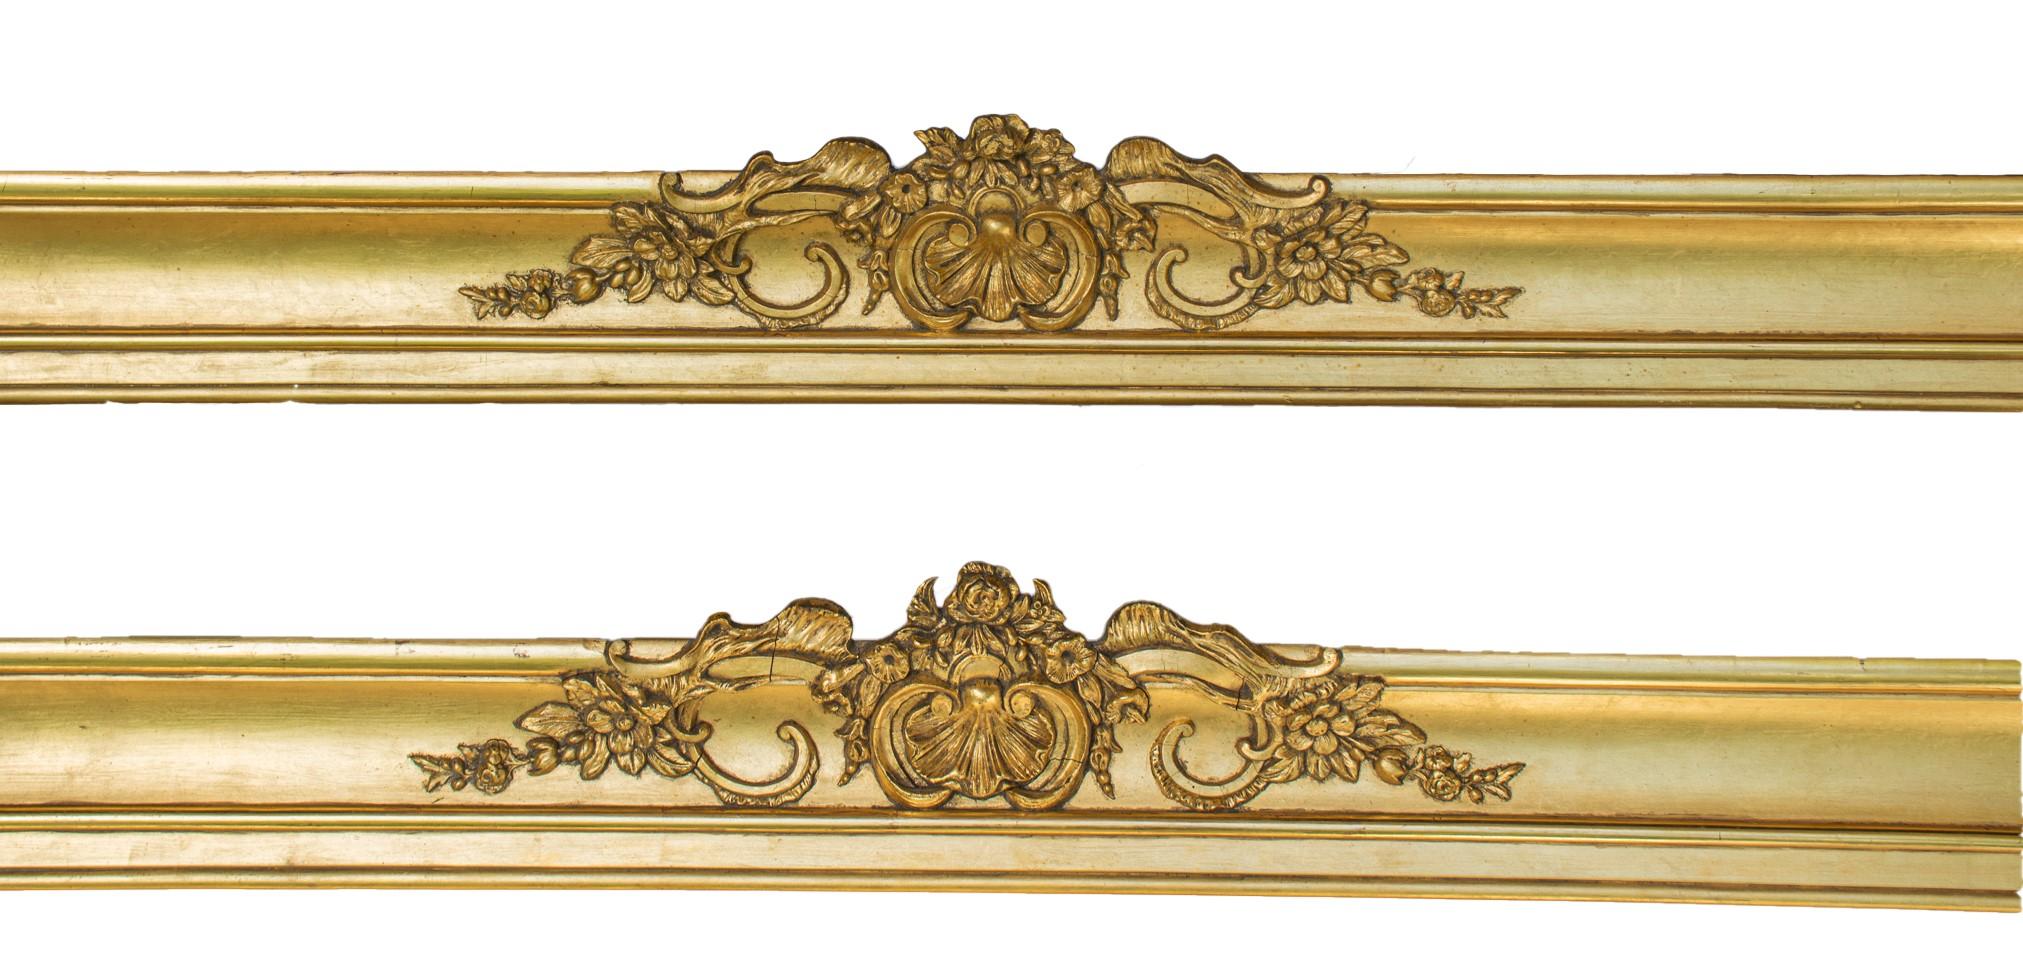 Pair of 18th century gold Irish Georgian water-gilt gold leaf curtain pelmets. They are from a stately home in Ireland. They have a classic Irish shell motif with intricate scrolling foliage wood carvings.